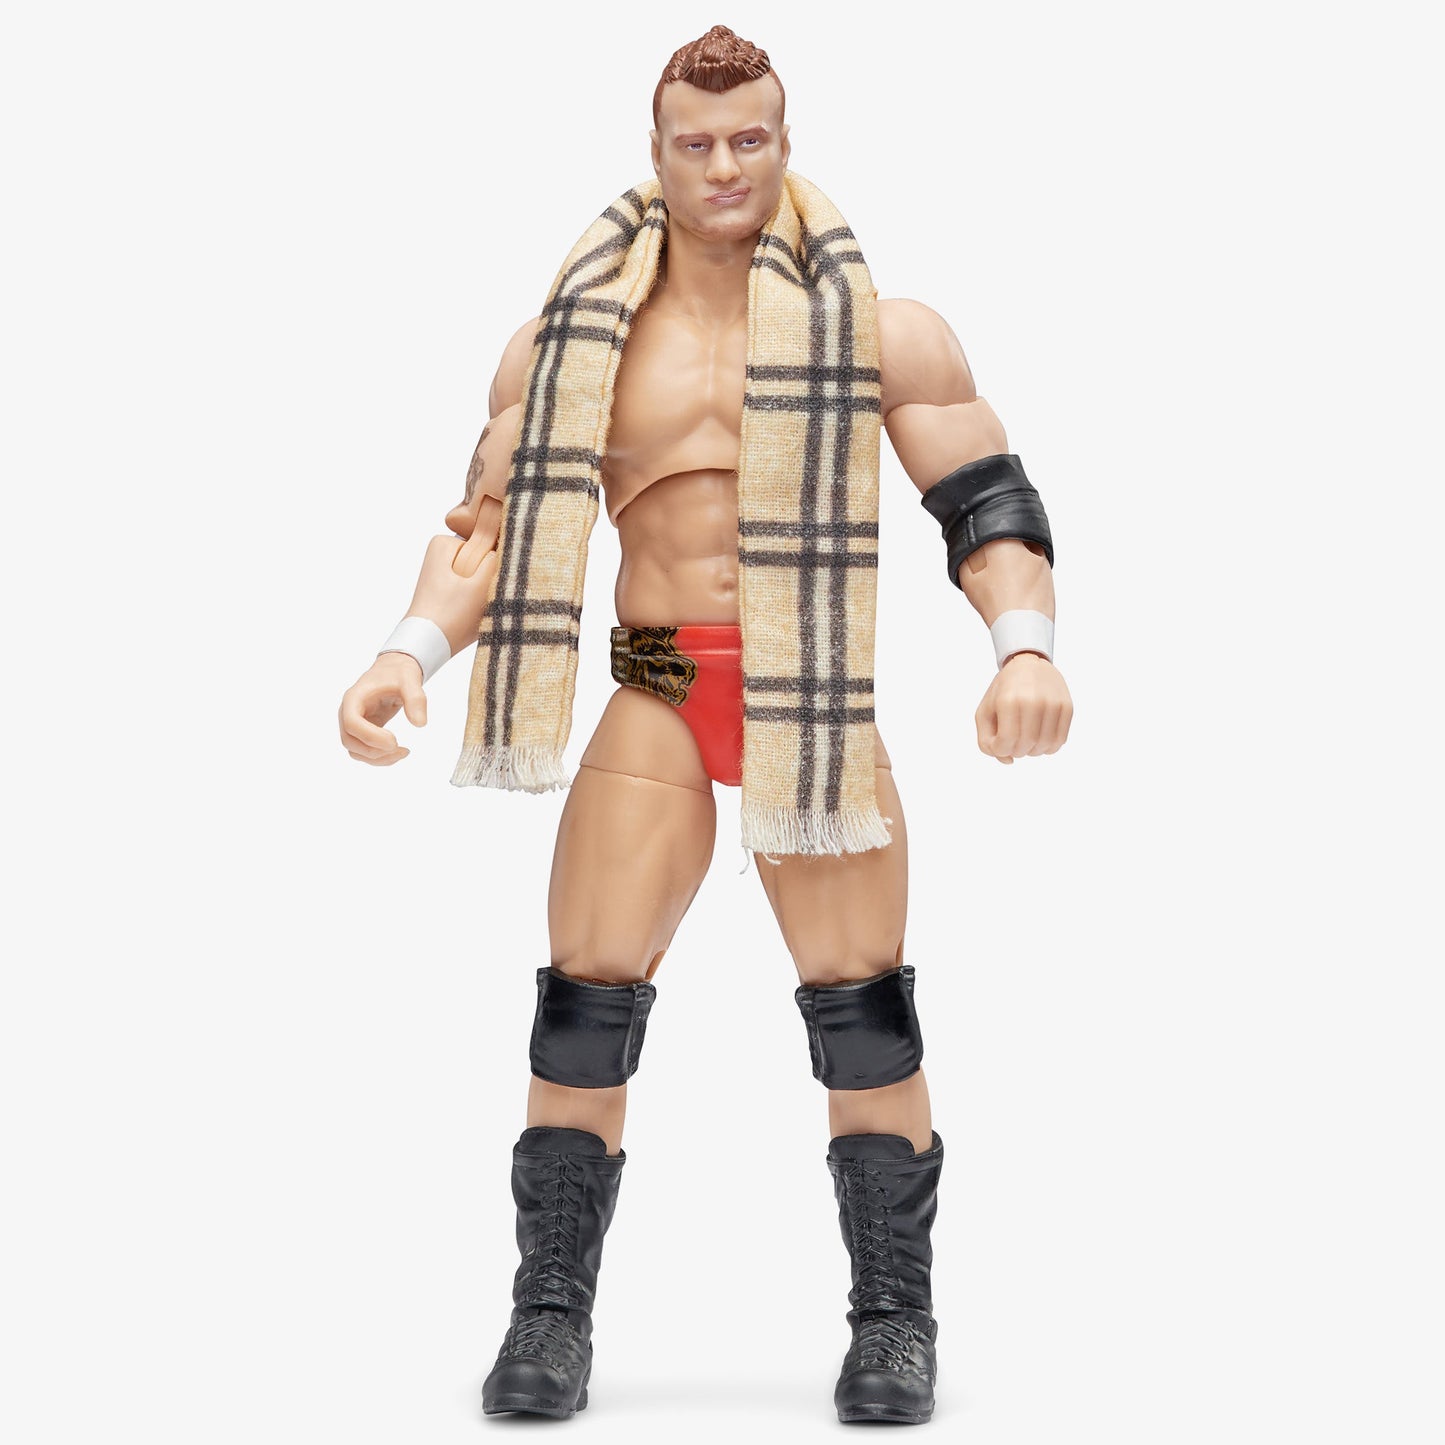 MJF - AEW Unrivaled Collection Series #2